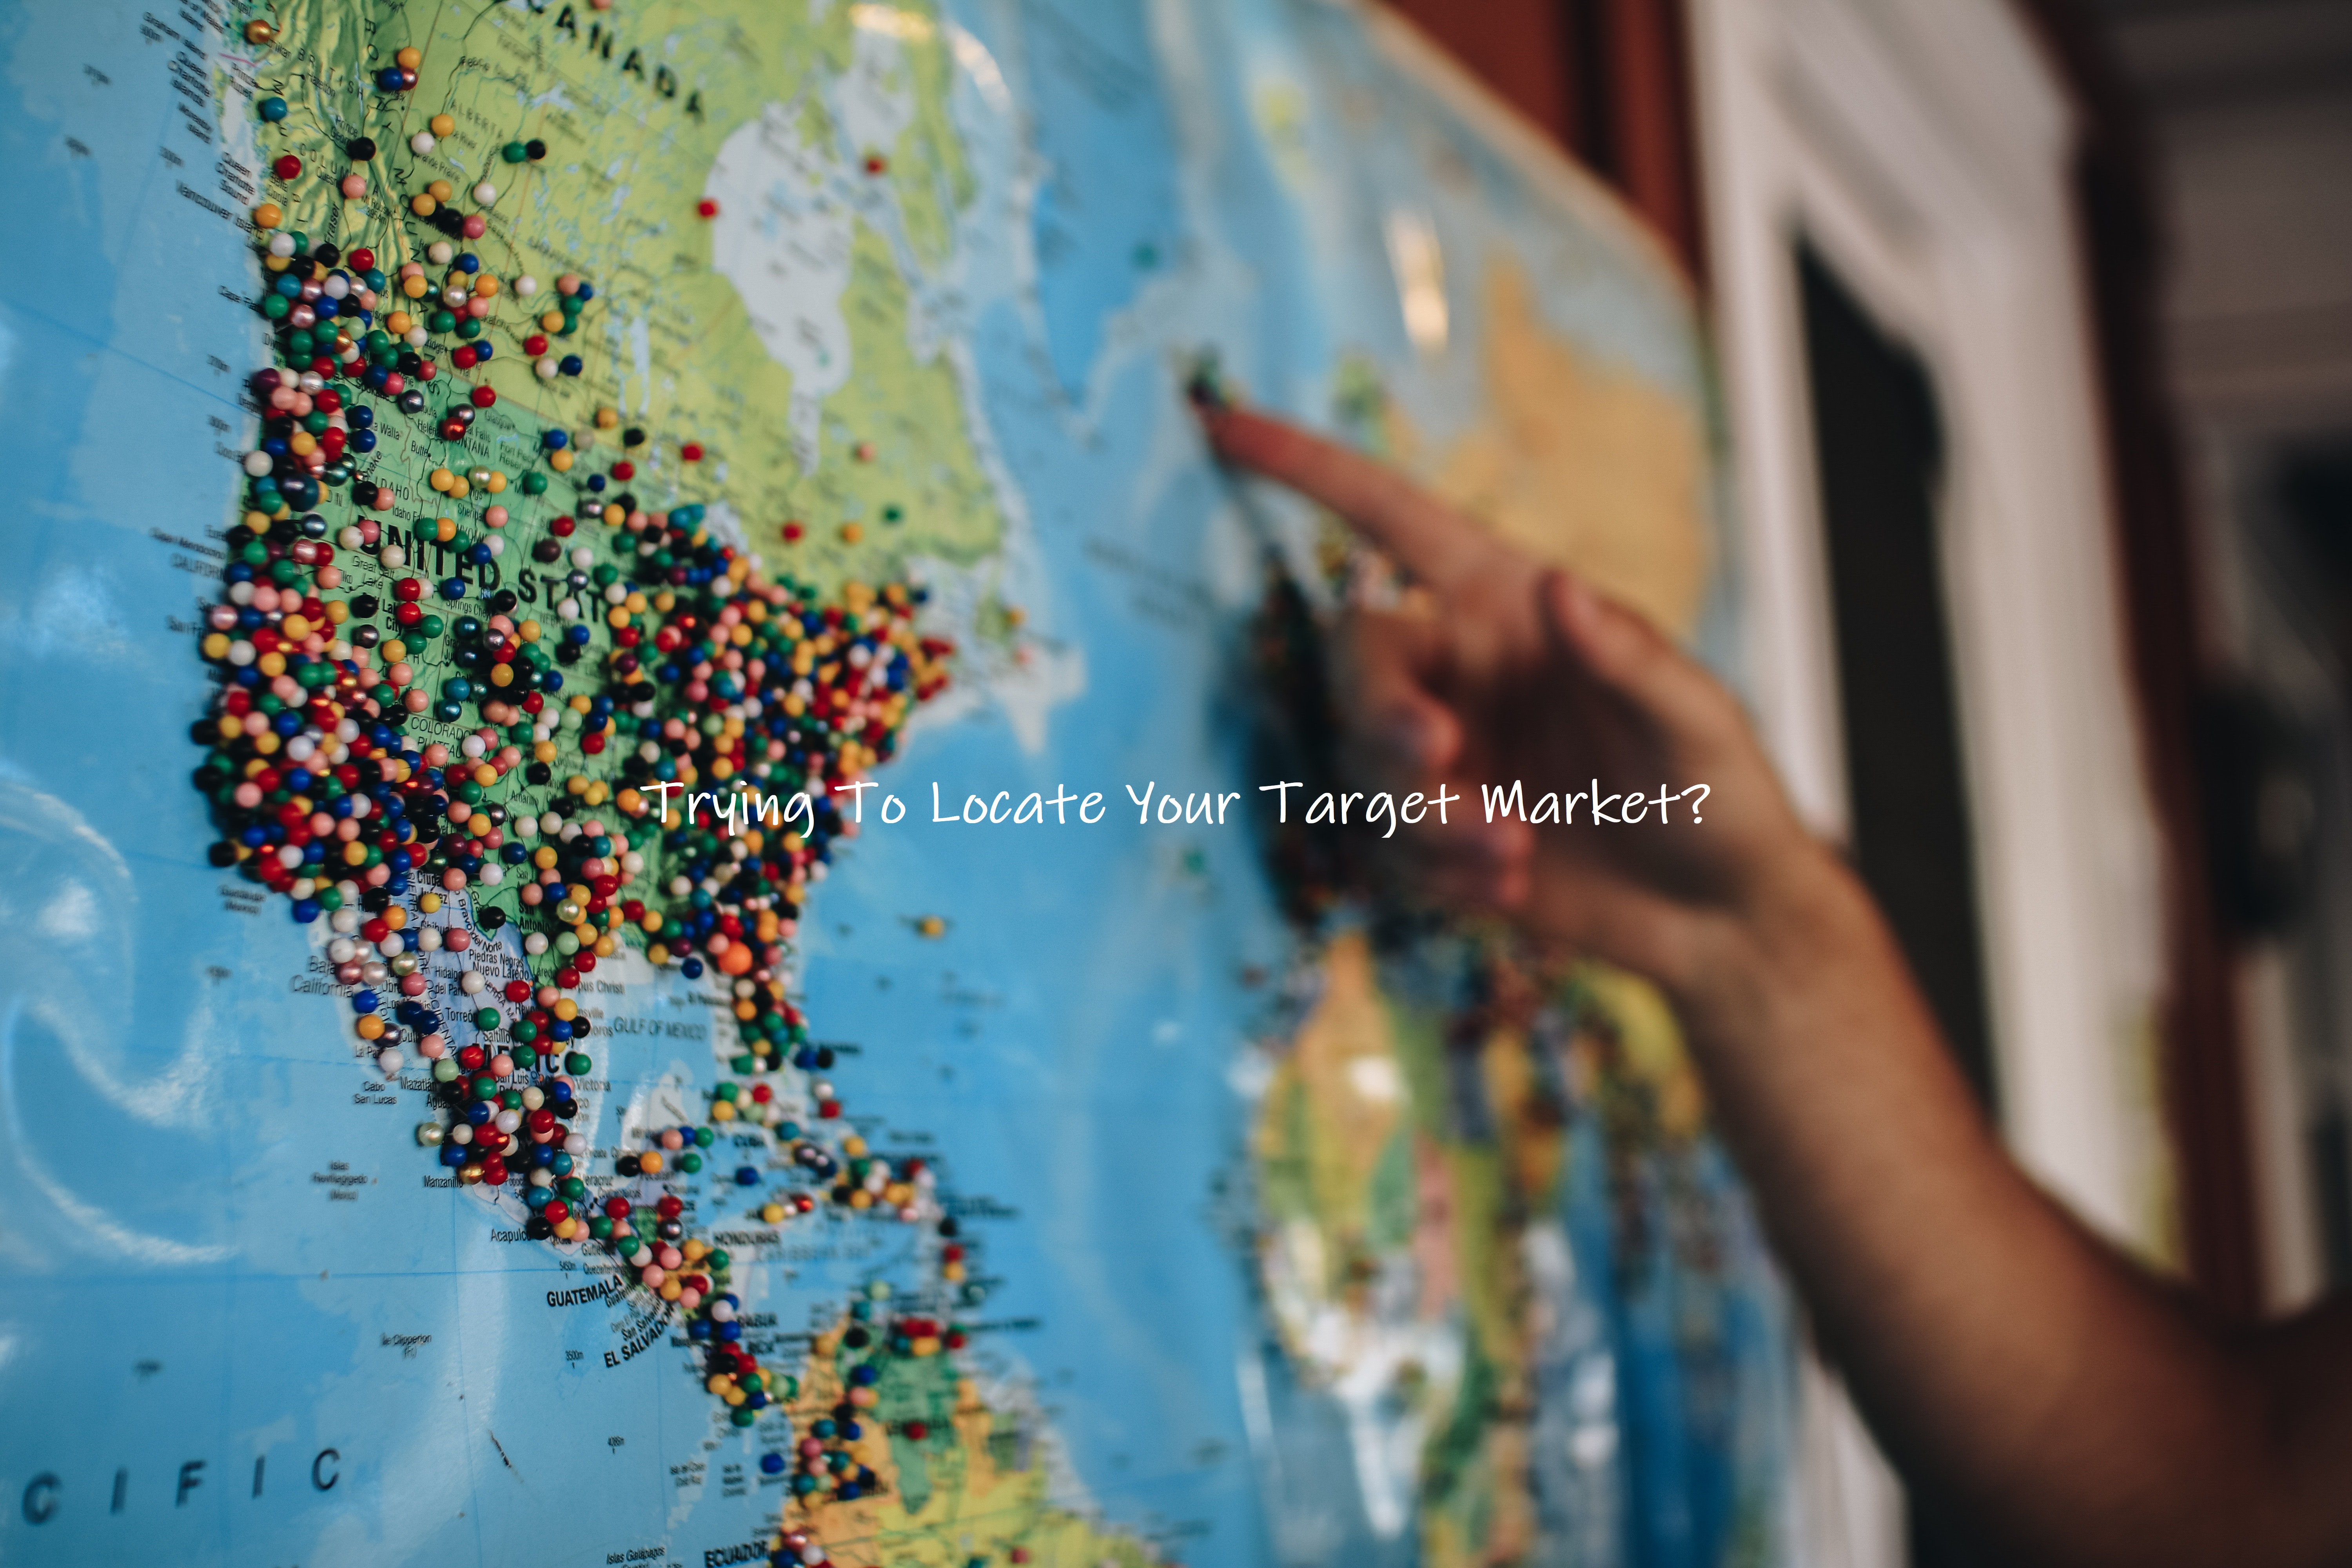 Trying to Locate Your Target Market?